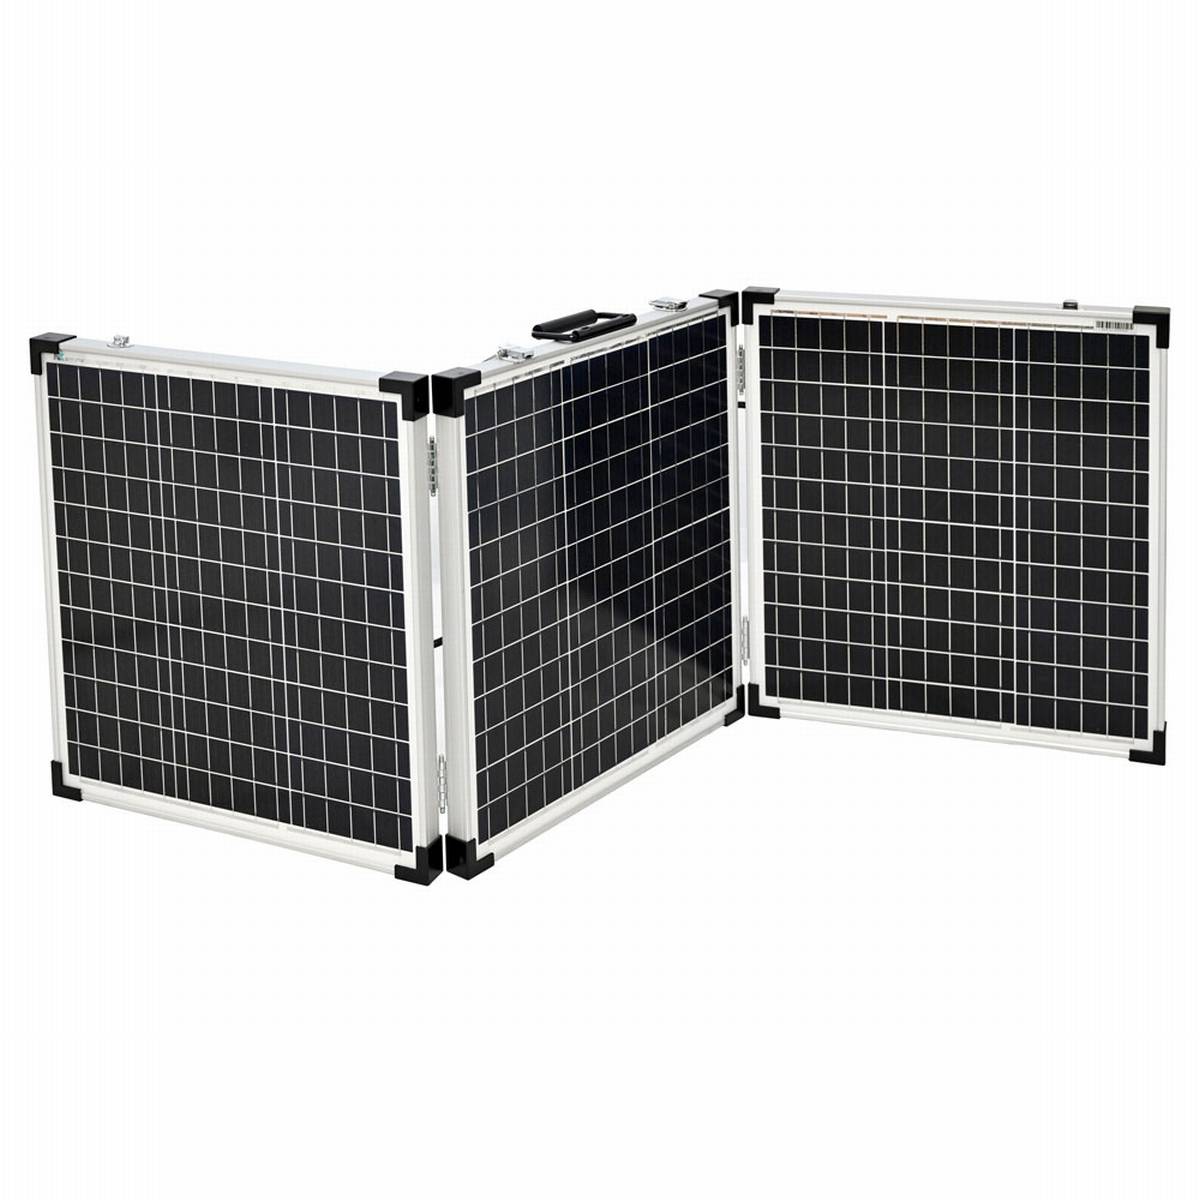 a-TroniX PPS Solar case Solarkoffer 150W